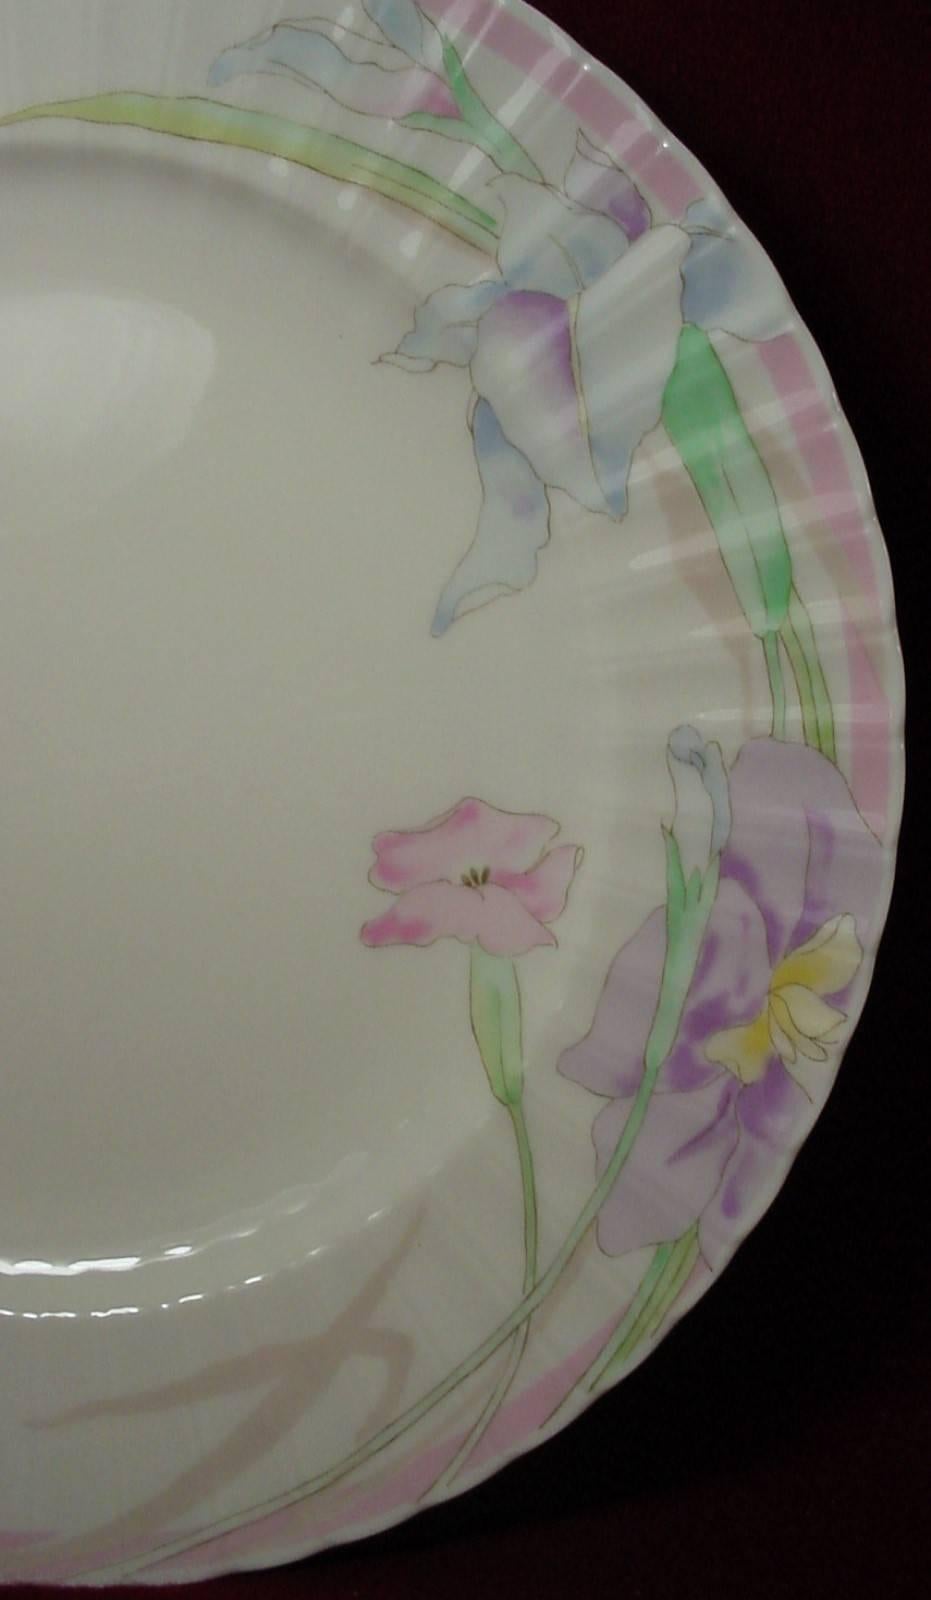 Mikasa china pink melody pattern 60-piece set service for 12.

In great condition free from chips, cracks, breaks or stains.

Large flowers with a pink band - petite bone. 

Includes 12 cups, 12 saucers, 12 dinner plates, 12 salad/dessert